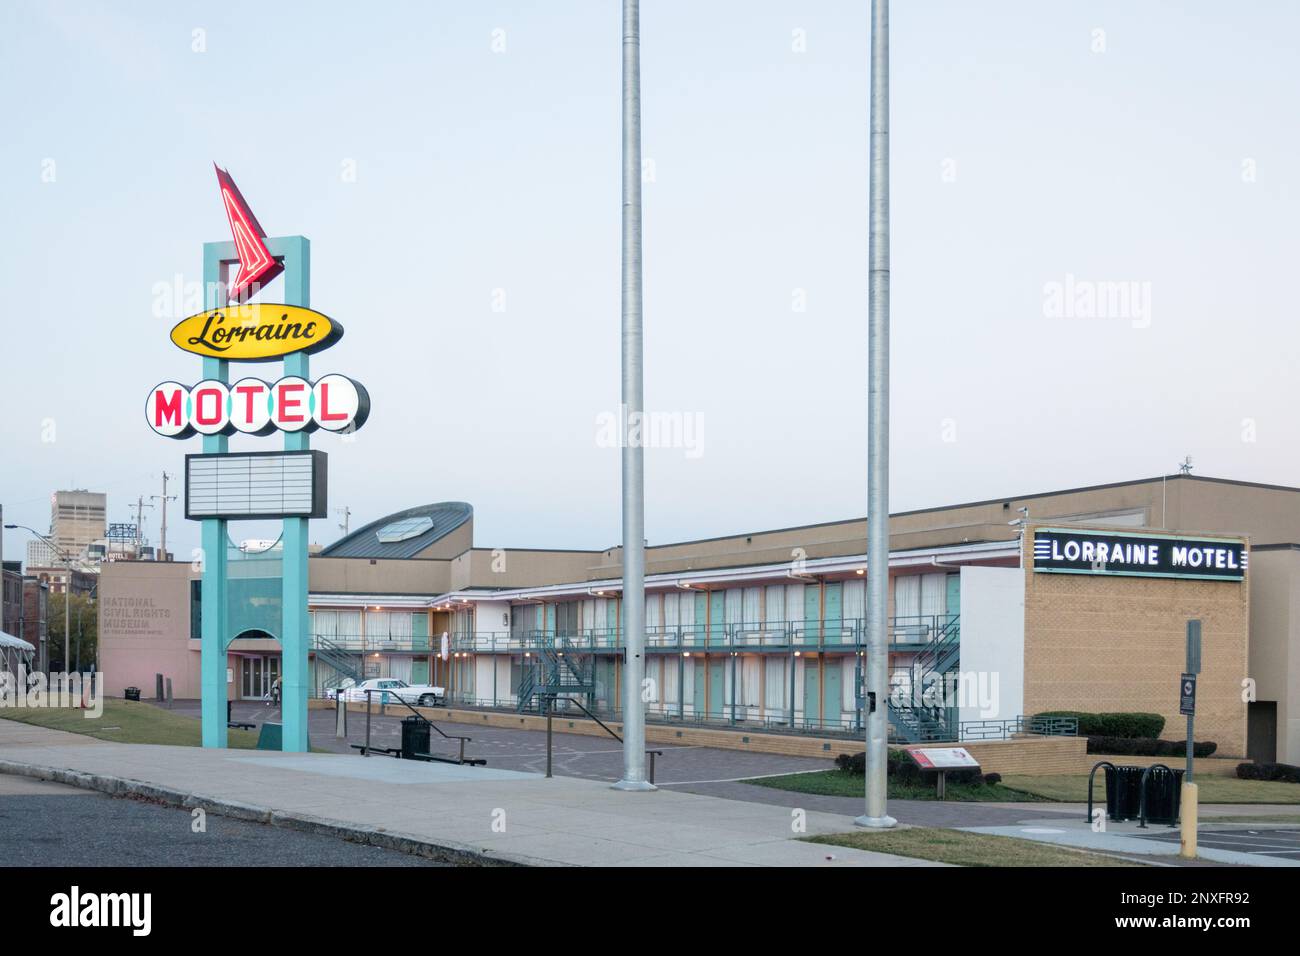 Exterior of The Lorraine Motel, National Civil Rights Museum, Memphis Tennessee. Showing lighted neon sign, motel rooms, and entrance with parking lot Stock Photo